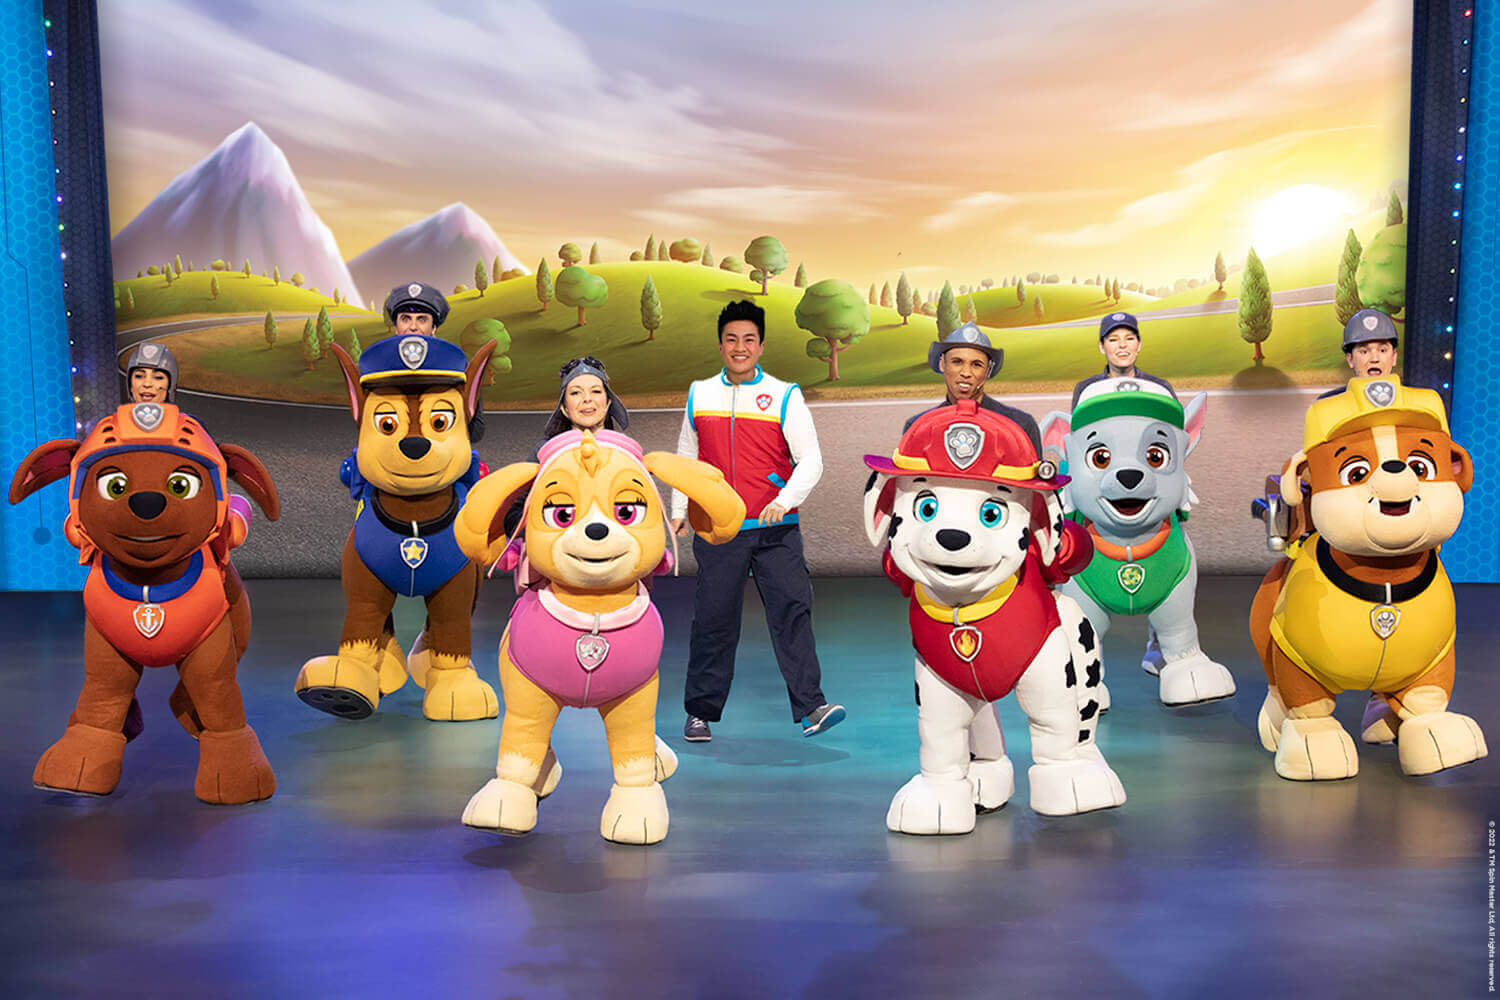 Paw Patrol: the megalomaniacal kids' TV show that's ruining my life, Children's TV